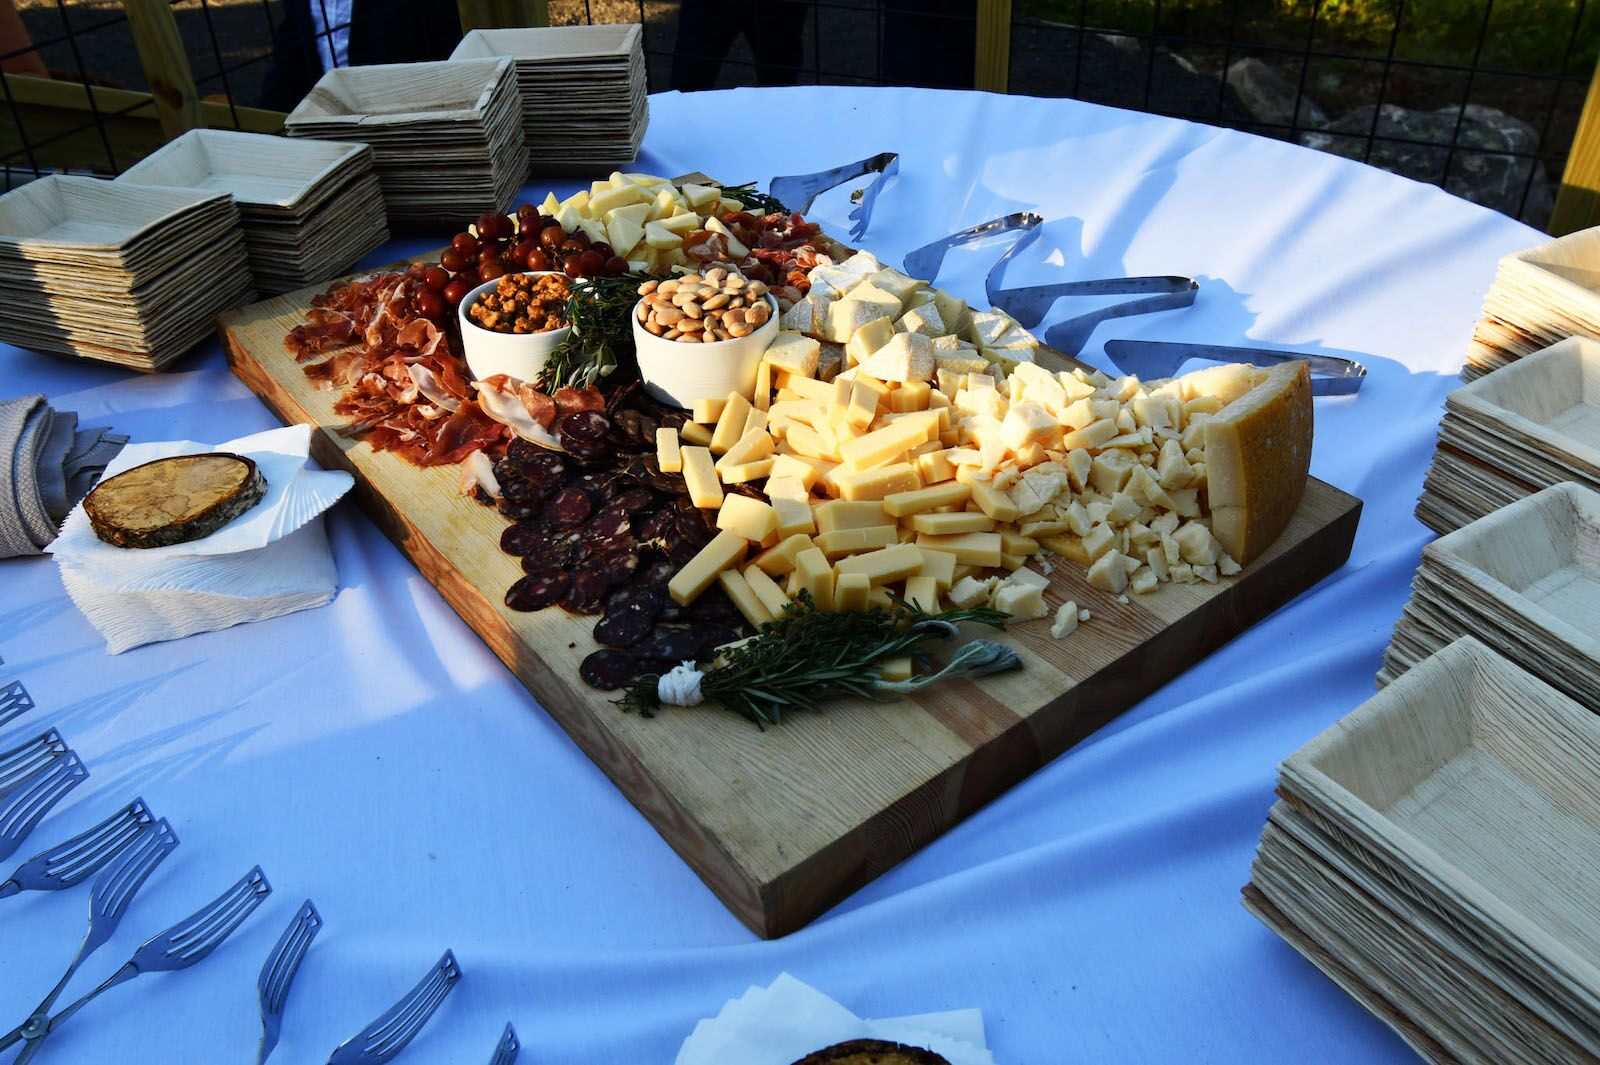 The preserve sporting club cheese plate